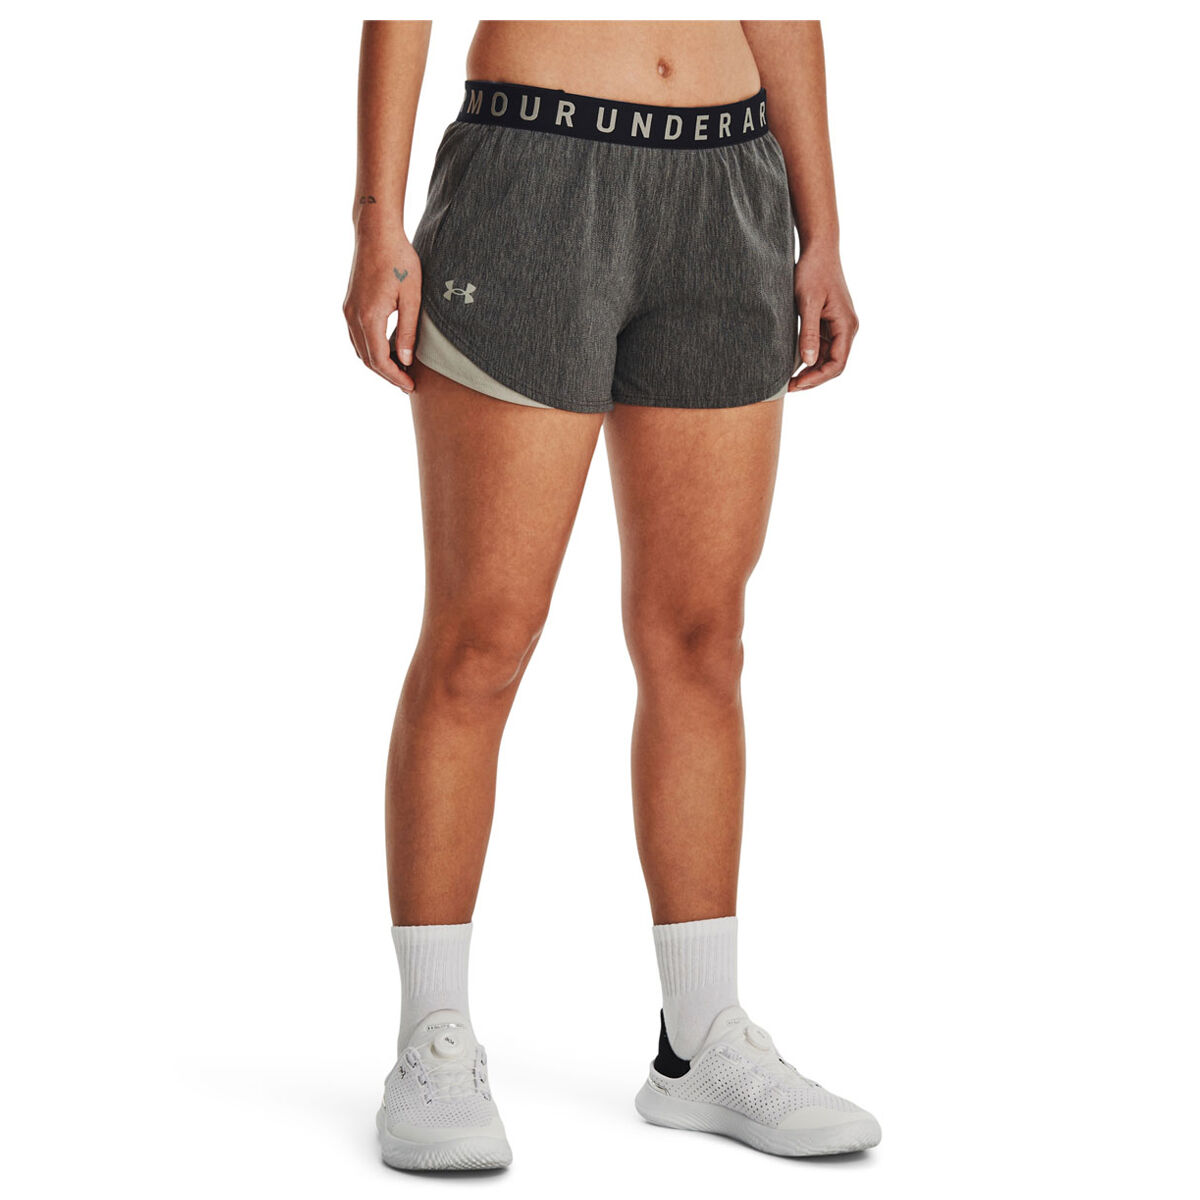 Under Armour Womens Baseline 6'' Shorts